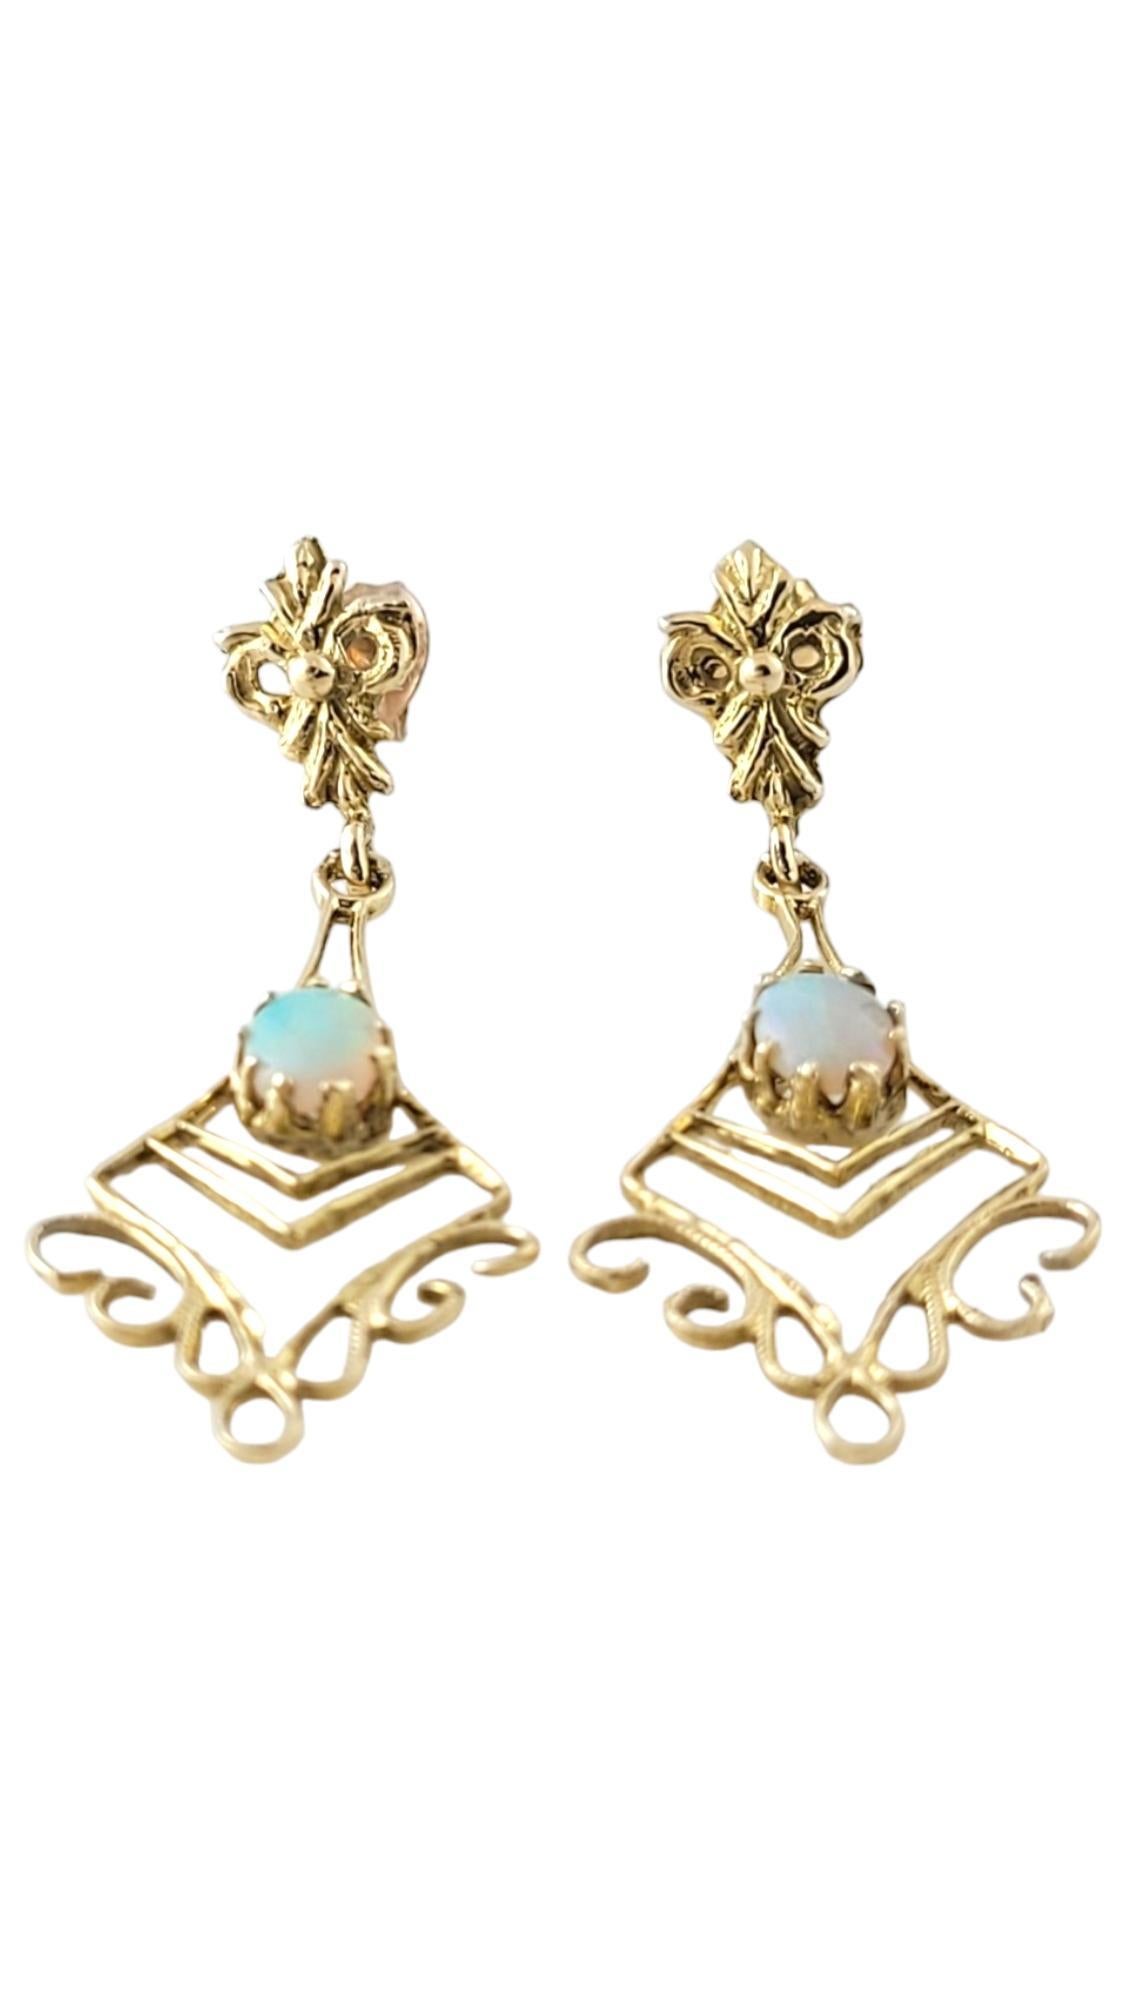 Vintage 10K Yellow Gold Opal Dangle Earrings

This beautiful set of 10K gold dangle earrings features 2 gorgeous opal stones in a stunning design!

Size: 41.0mm x 15.2mm X 4.0mm

Weight: 1.8 dwt/ 2.8 g

Tested 10K

Very good condition,